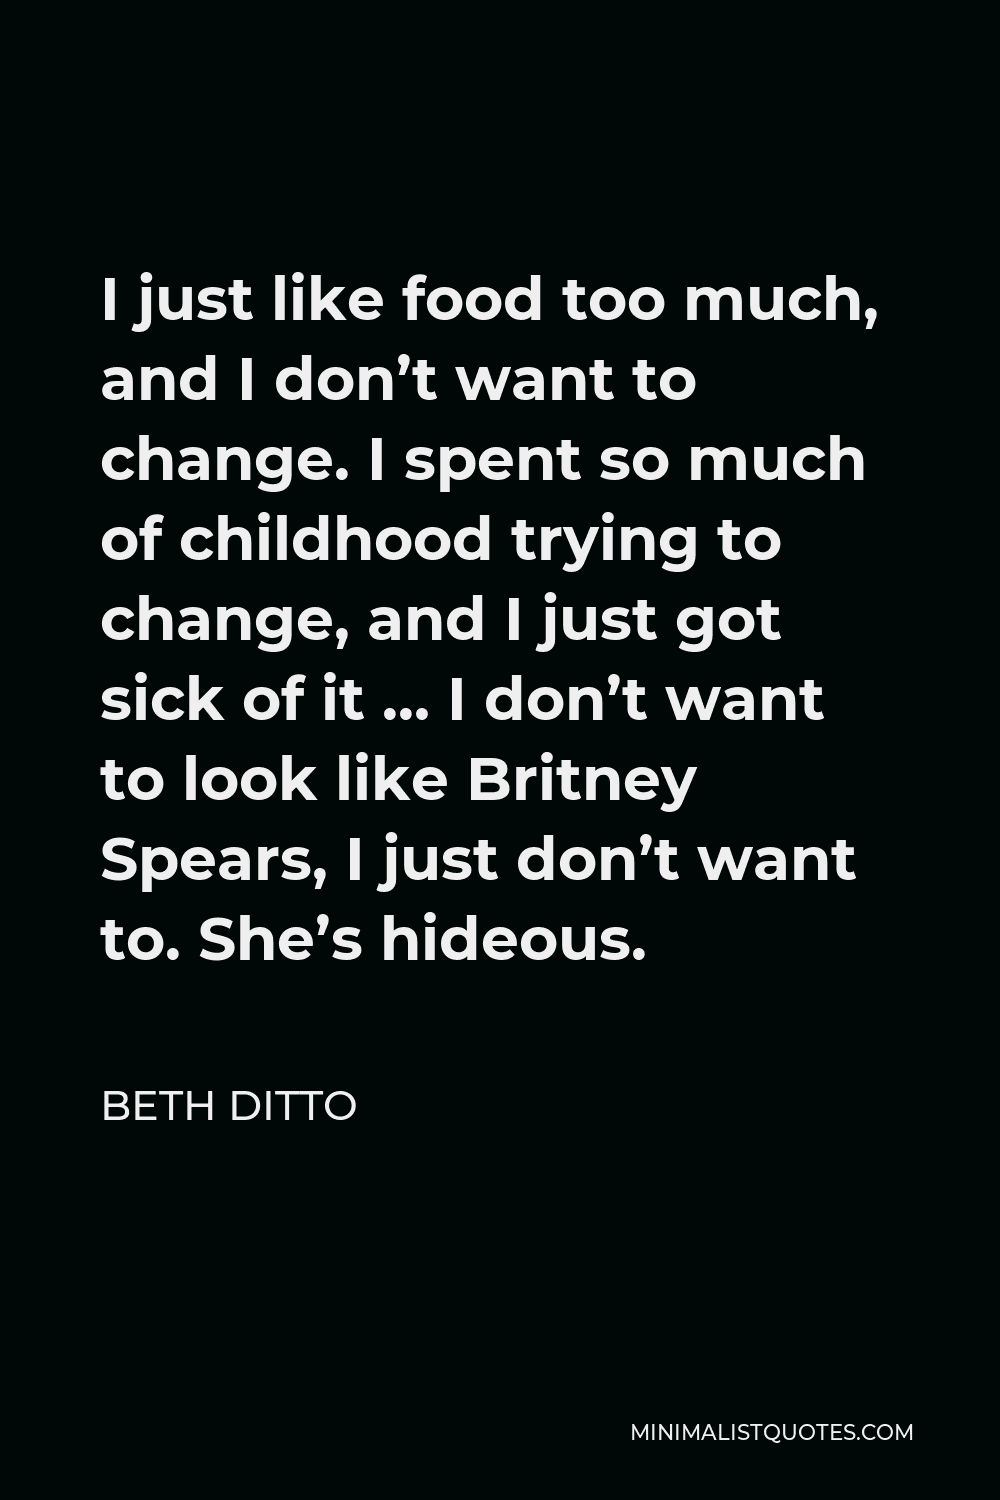 Beth Ditto Quote - I just like food too much, and I don’t want to change. I spent so much of childhood trying to change, and I just got sick of it … I don’t want to look like Britney Spears, I just don’t want to. She’s hideous.